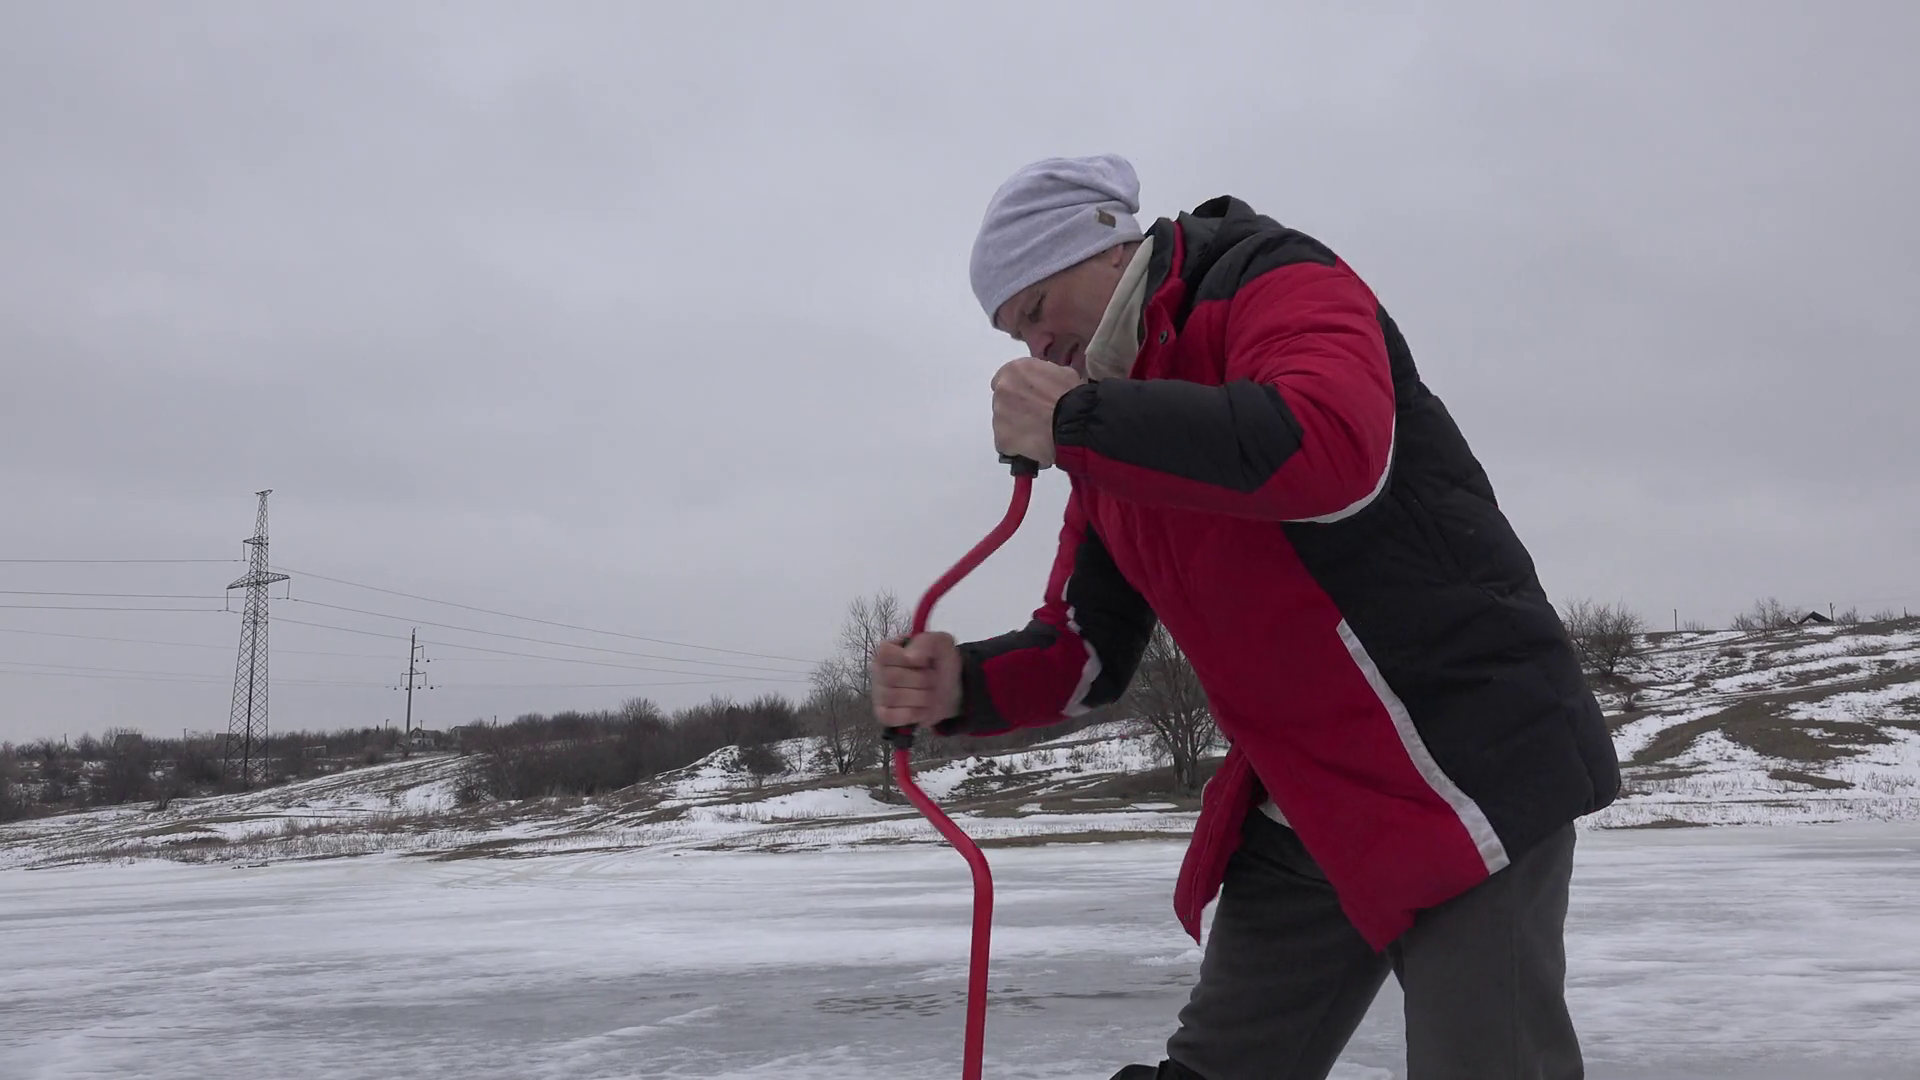 Fisherman drills hole in ice for winter fishing on frozen pond US 4k ...